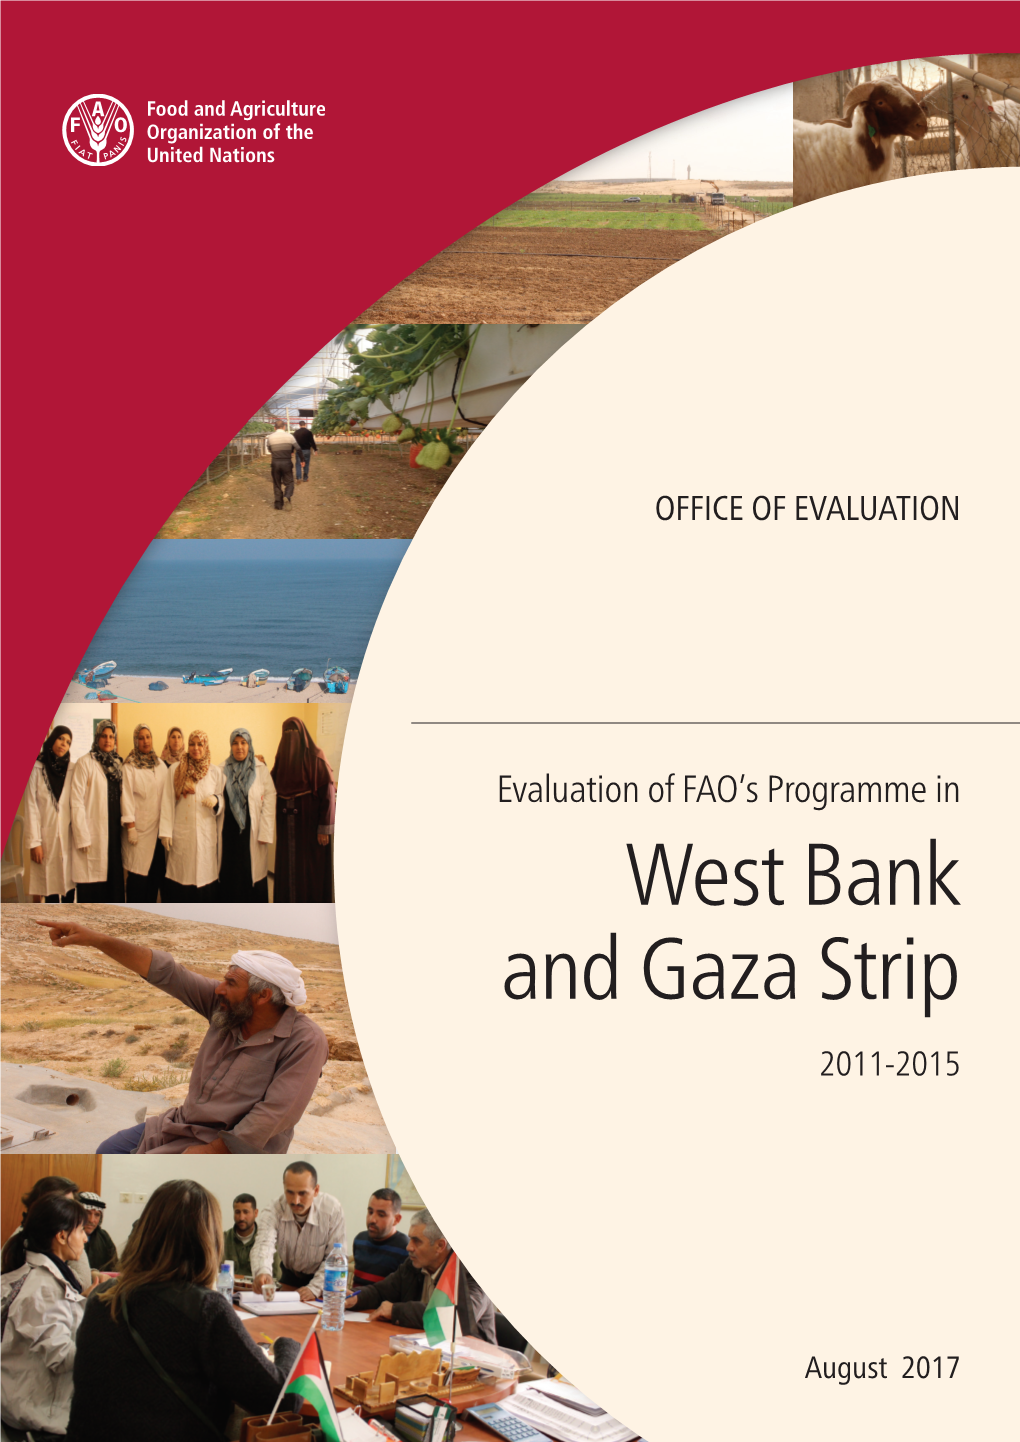 Evaluation of FAO's Programme in West Bank and Gaza Strip 2011-2015